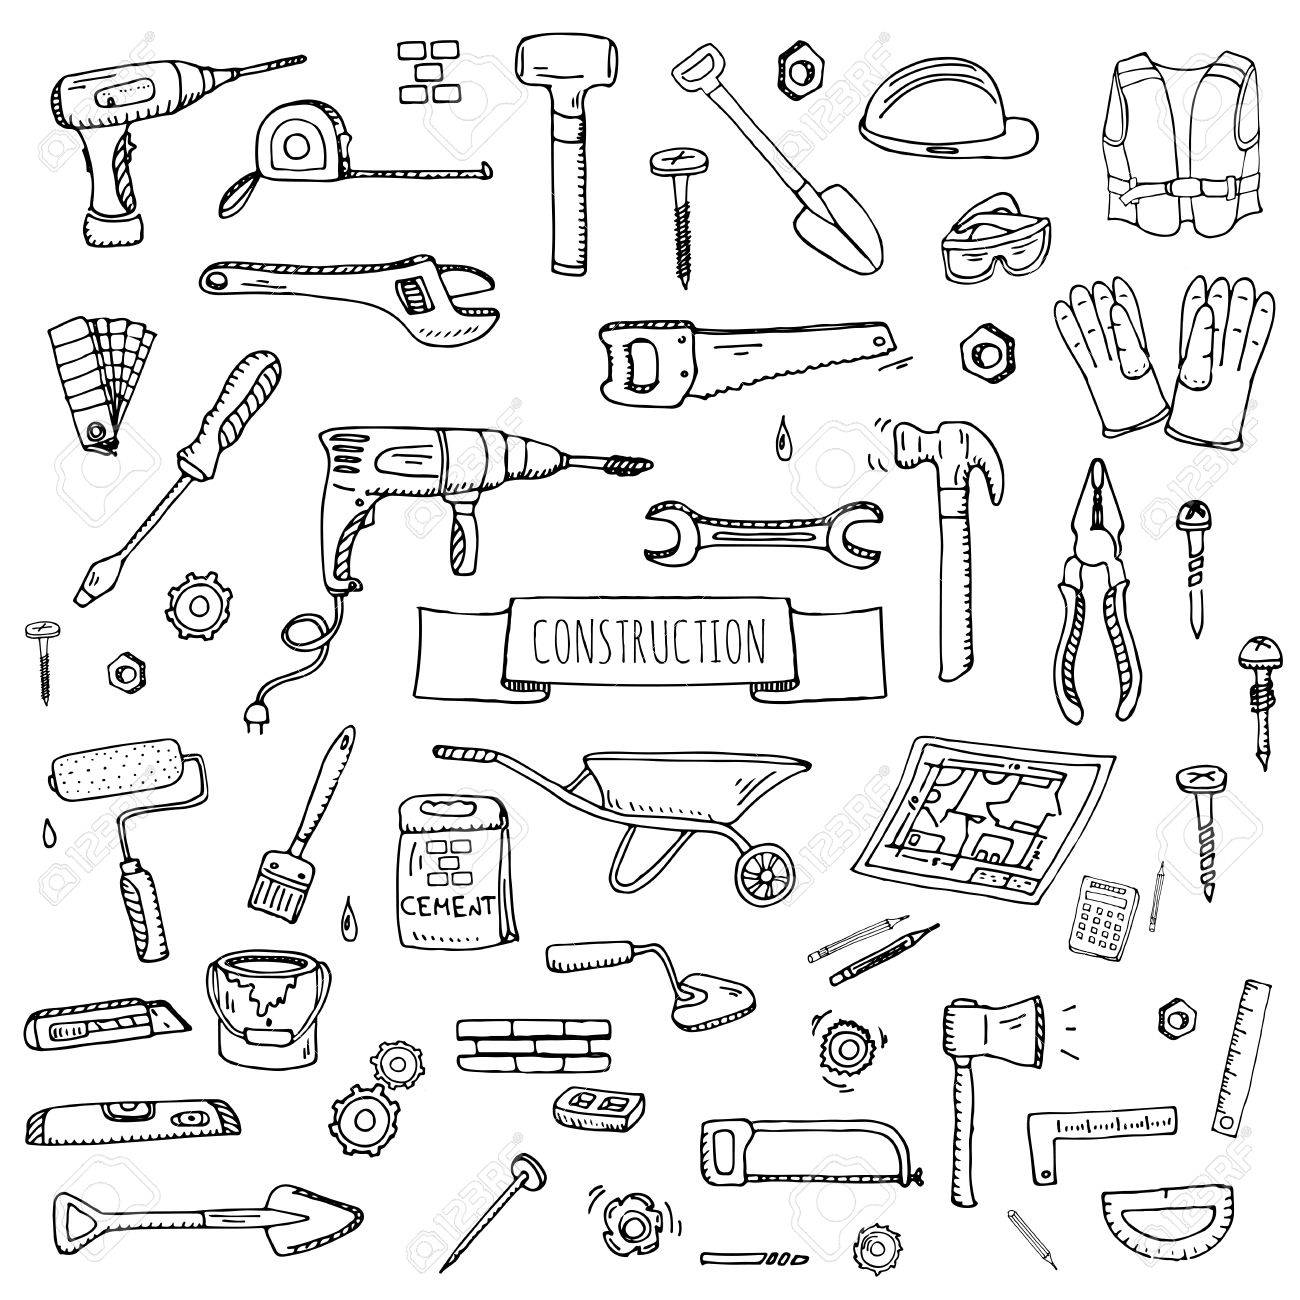 The Creator Office 34+ How To Draw Construction Tools Images